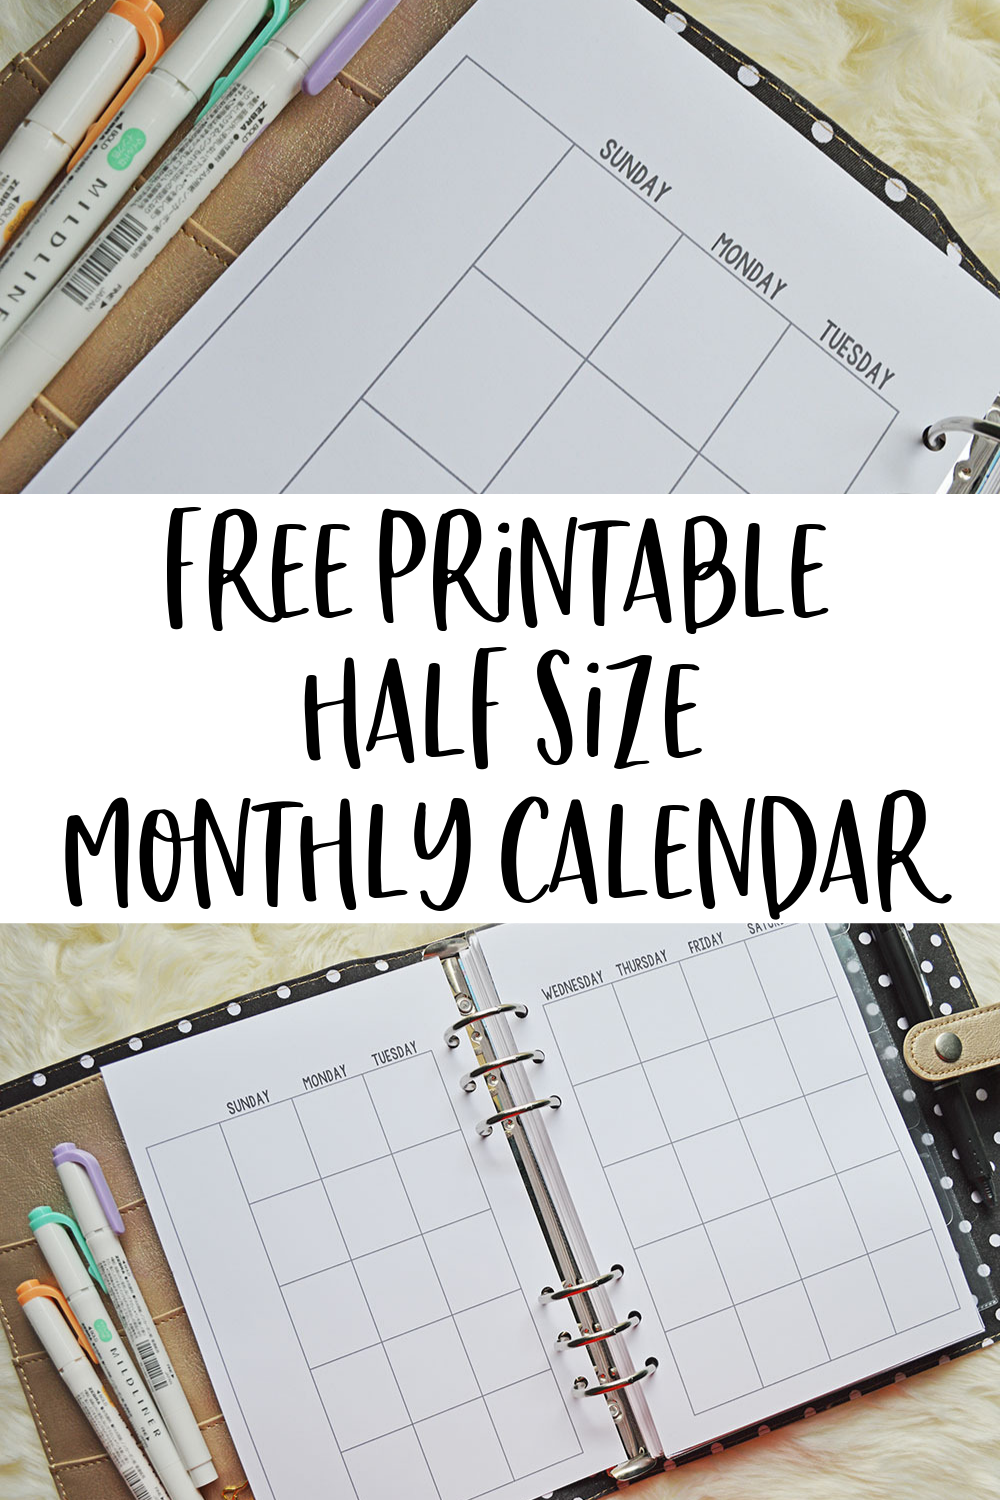 Free Printable Half Size Monthly Calendar For Your A5 Planner -   16 fitness Design free printable ideas